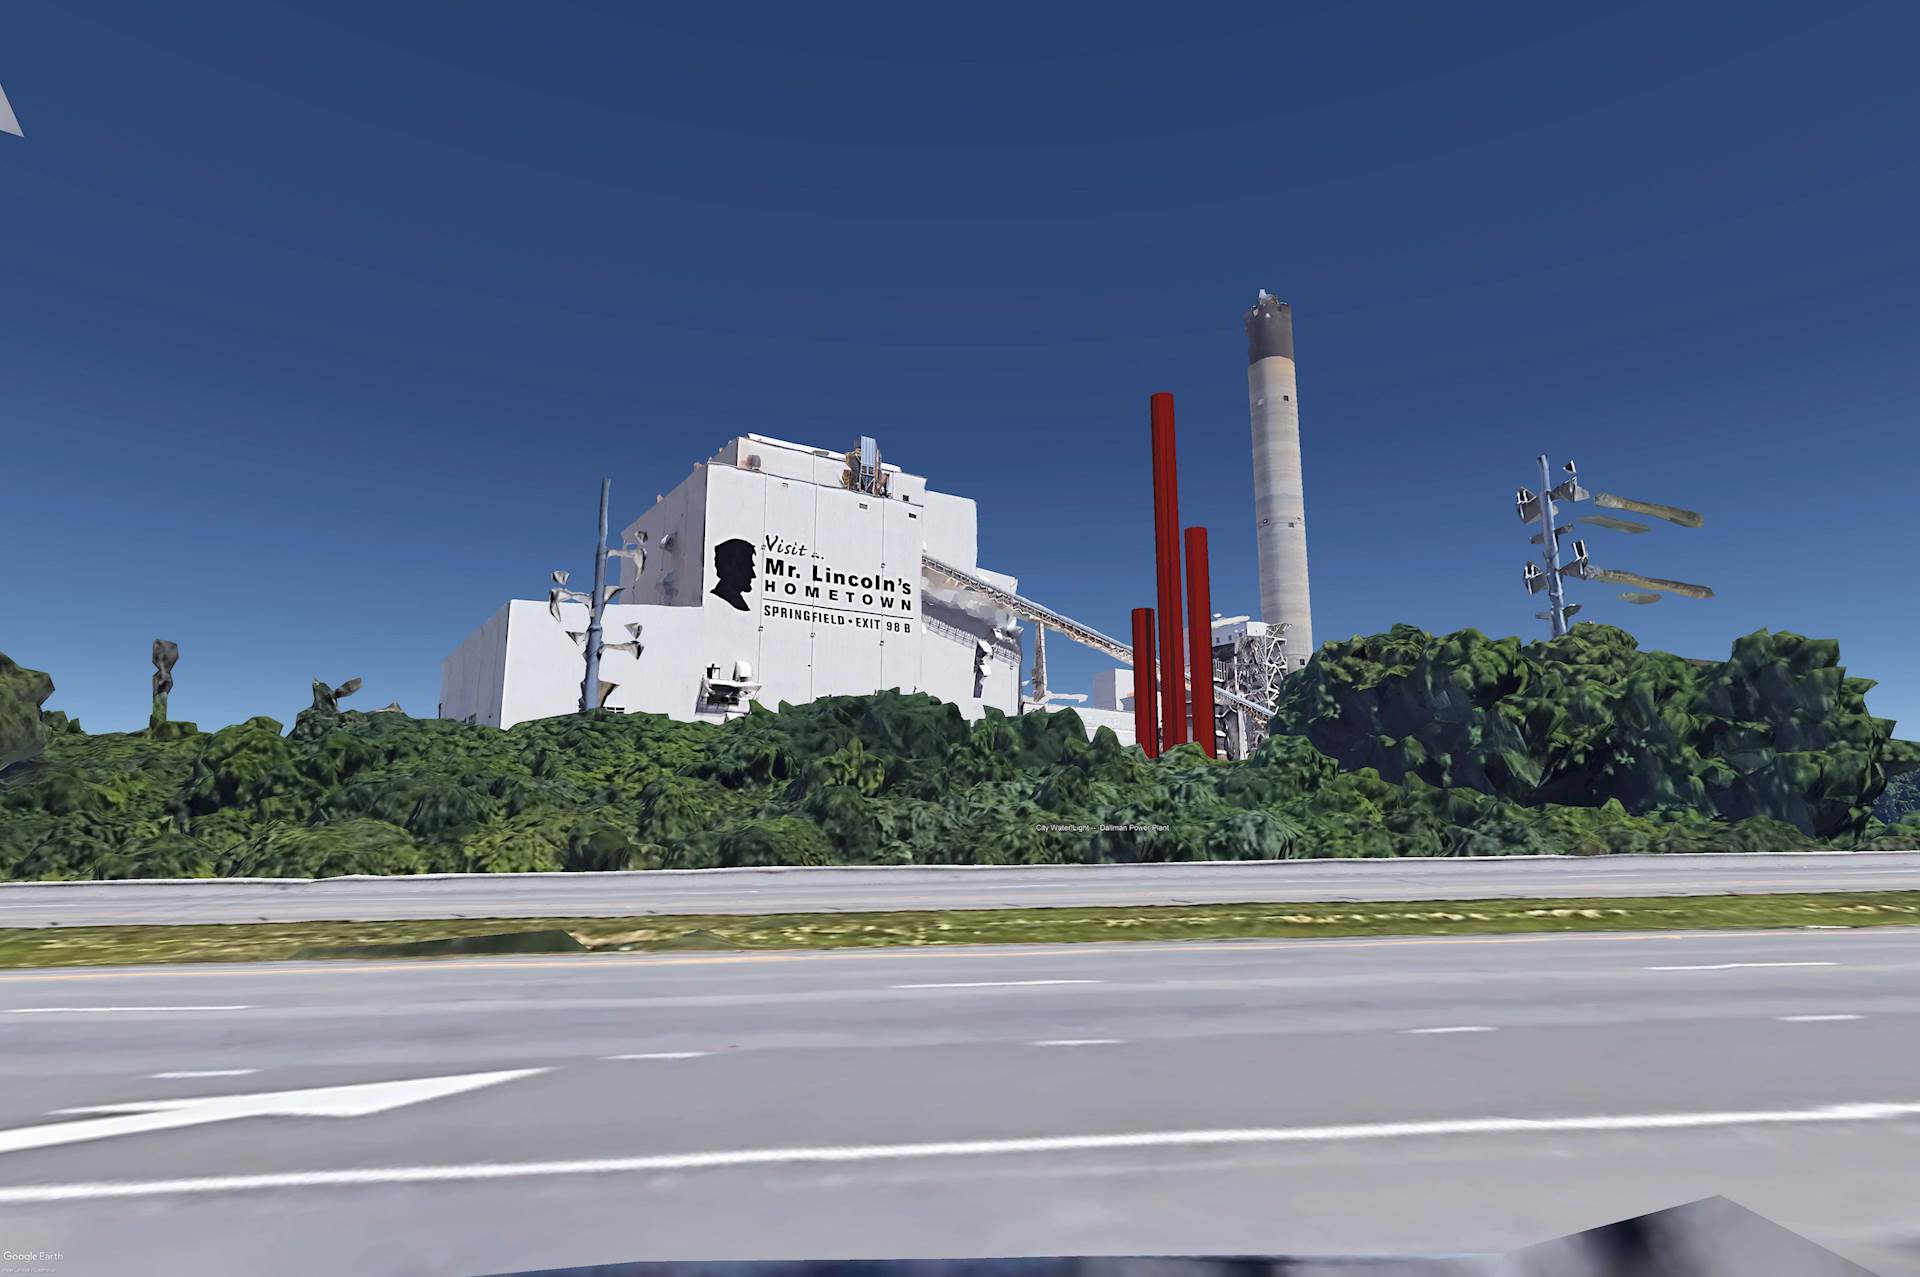 A rendering of a power plant, as seen from a tree-lined roadway.